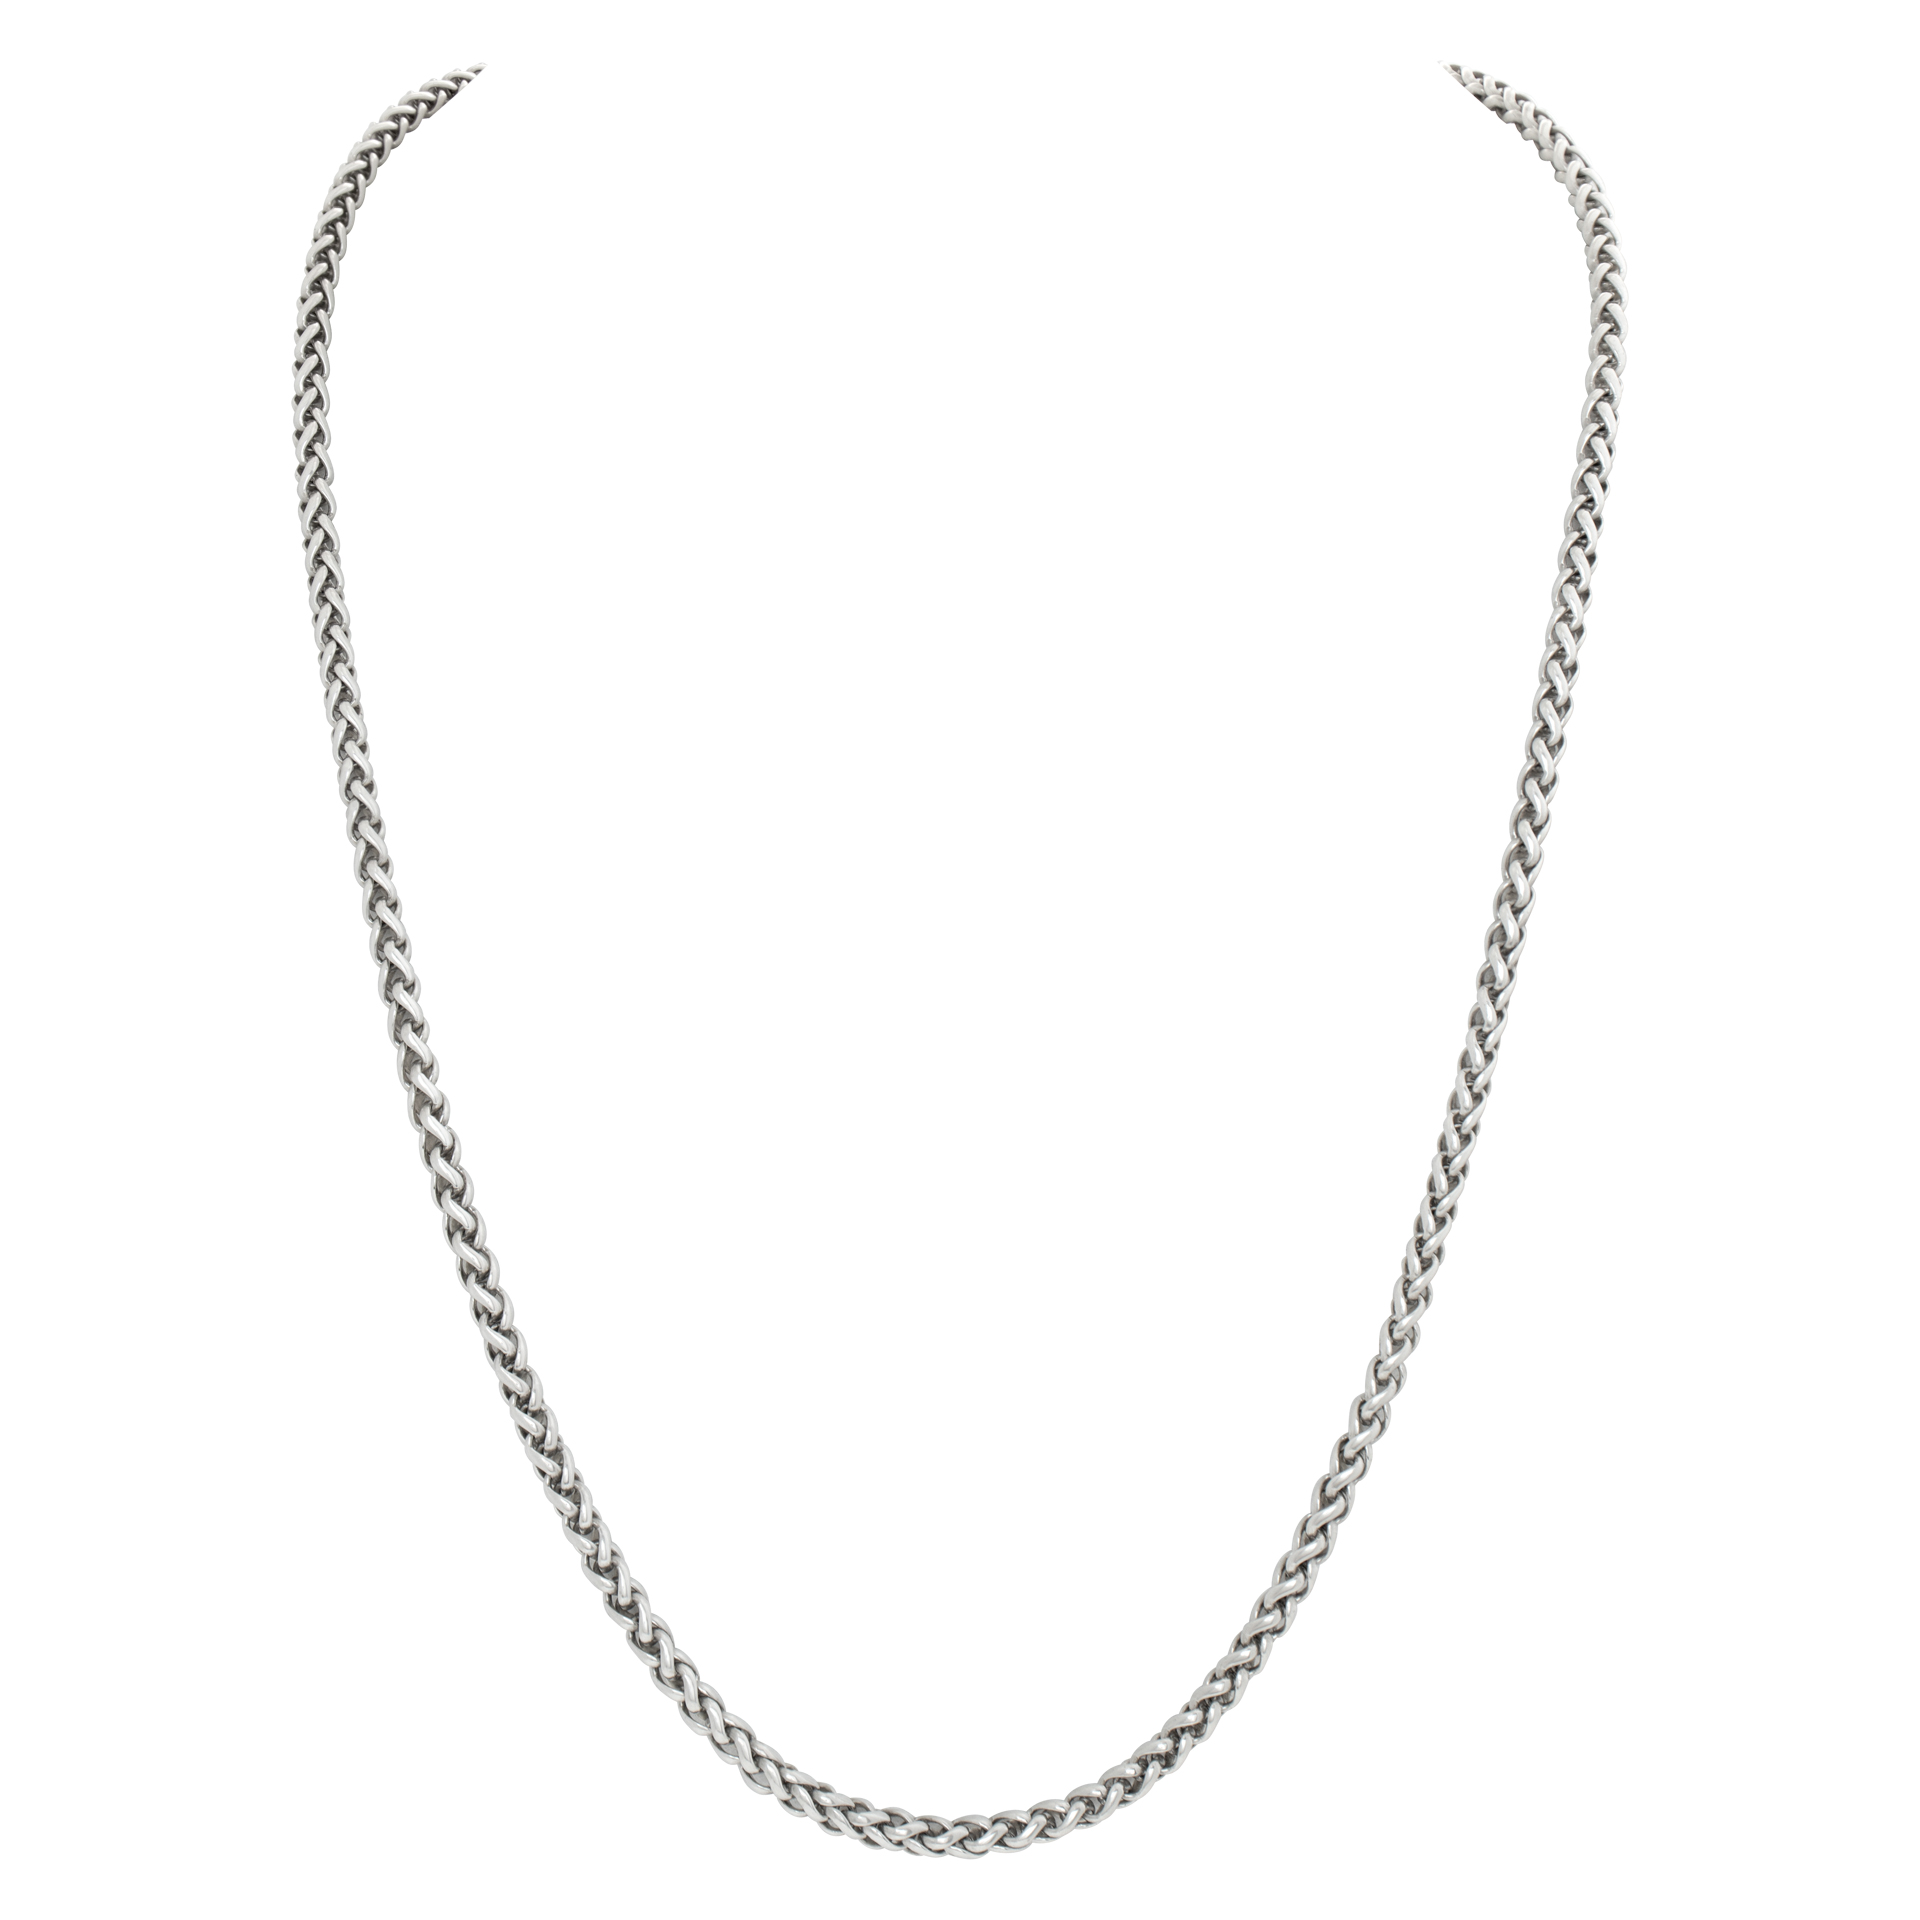 David Yurman 4mm wheat link necklace 30" in sterling silver image 1